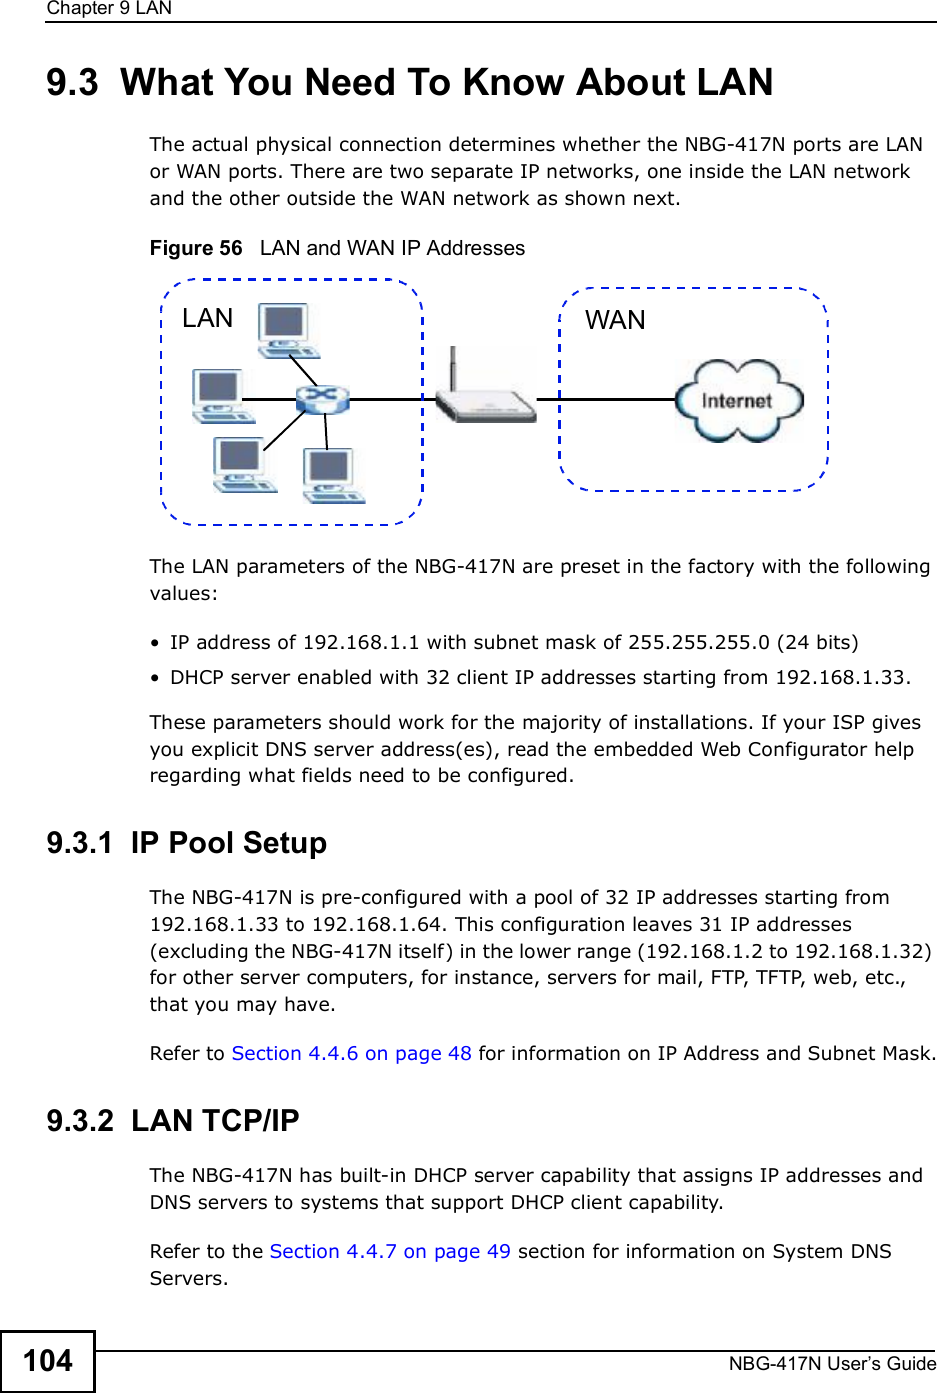 Chapter 9LANNBG-417N User s Guide1049.3  What You Need To Know About LANThe actual physical connection determines whether the NBG-417N ports are LAN or WAN ports. There are two separate IP networks, one inside the LAN network and the other outside the WAN network as shown next.Figure 56   LAN and WAN IP AddressesThe LAN parameters of the NBG-417N are preset in the factory with the following values: IP address of 192.168.1.1 with subnet mask of 255.255.255.0 (24 bits) DHCP server enabled with 32 client IP addresses starting from 192.168.1.33. These parameters should work for the majority of installations. If your ISP gives you explicit DNS server address(es), read the embedded Web Configurator help regarding what fields need to be configured.9.3.1  IP Pool SetupThe NBG-417N is pre-configured with a pool of 32 IP addresses starting from 192.168.1.33 to 192.168.1.64. This configuration leaves 31 IP addresses (excluding the NBG-417N itself) in the lower range (192.168.1.2 to 192.168.1.32) for other server computers, for instance, servers for mail, FTP, TFTP, web, etc., that you may have.Refer to Section 4.4.6 on page 48 for information on IP Address and Subnet Mask.9.3.2  LAN TCP/IP The NBG-417N has built-in DHCP server capability that assigns IP addresses and DNS servers to systems that support DHCP client capability.Refer to the Section 4.4.7 on page 49 section for information on System DNS Servers.WANLAN